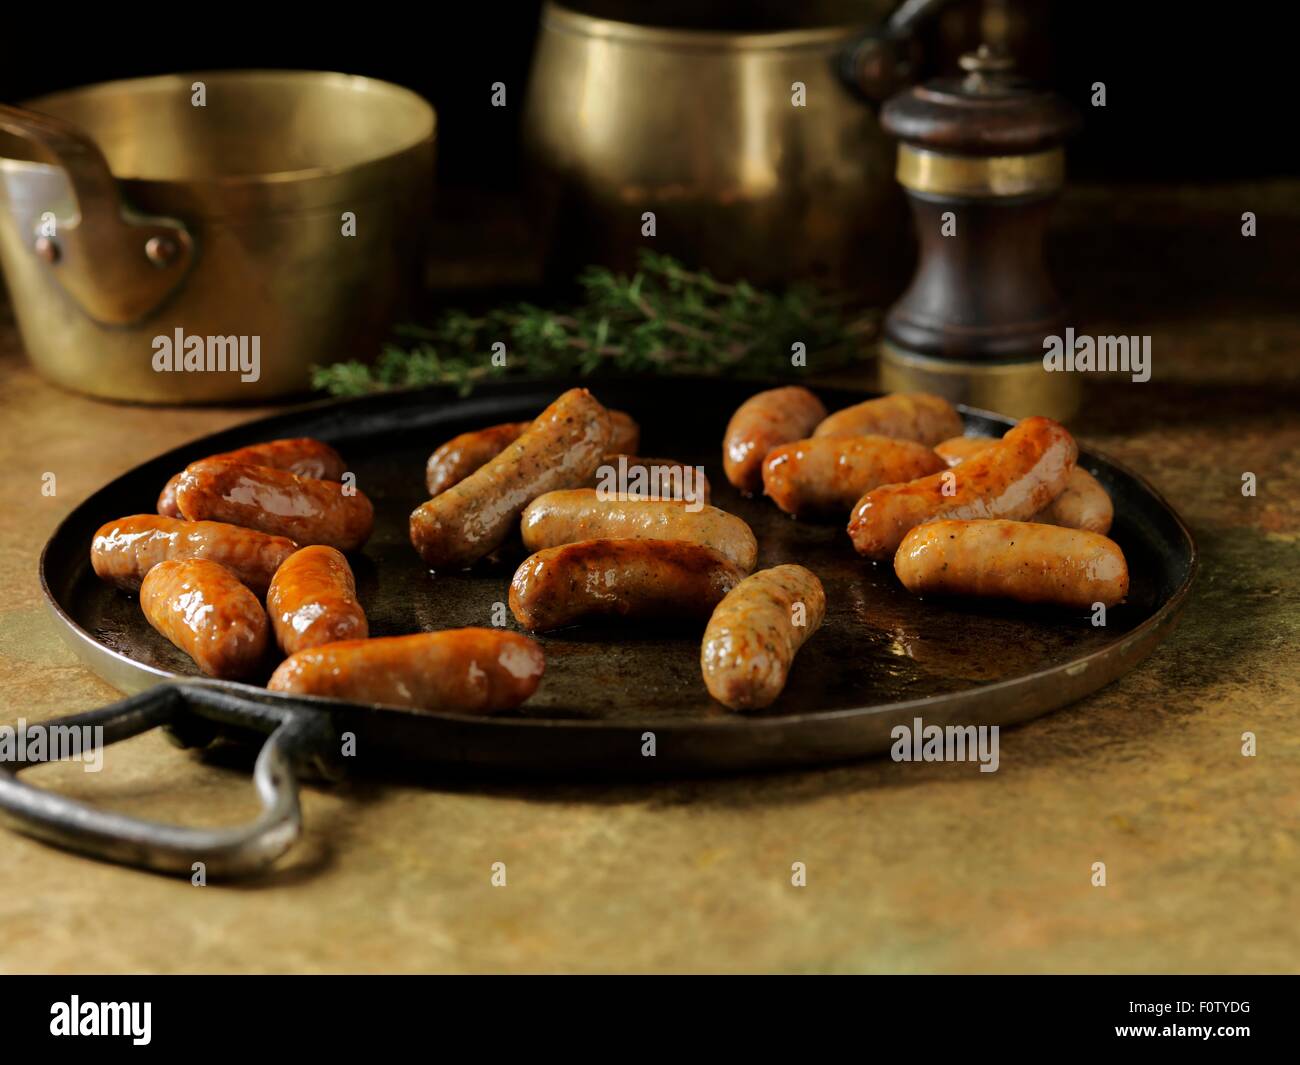 Rustic still life with fried cocktail sausages in metal serving dish Stock Photo